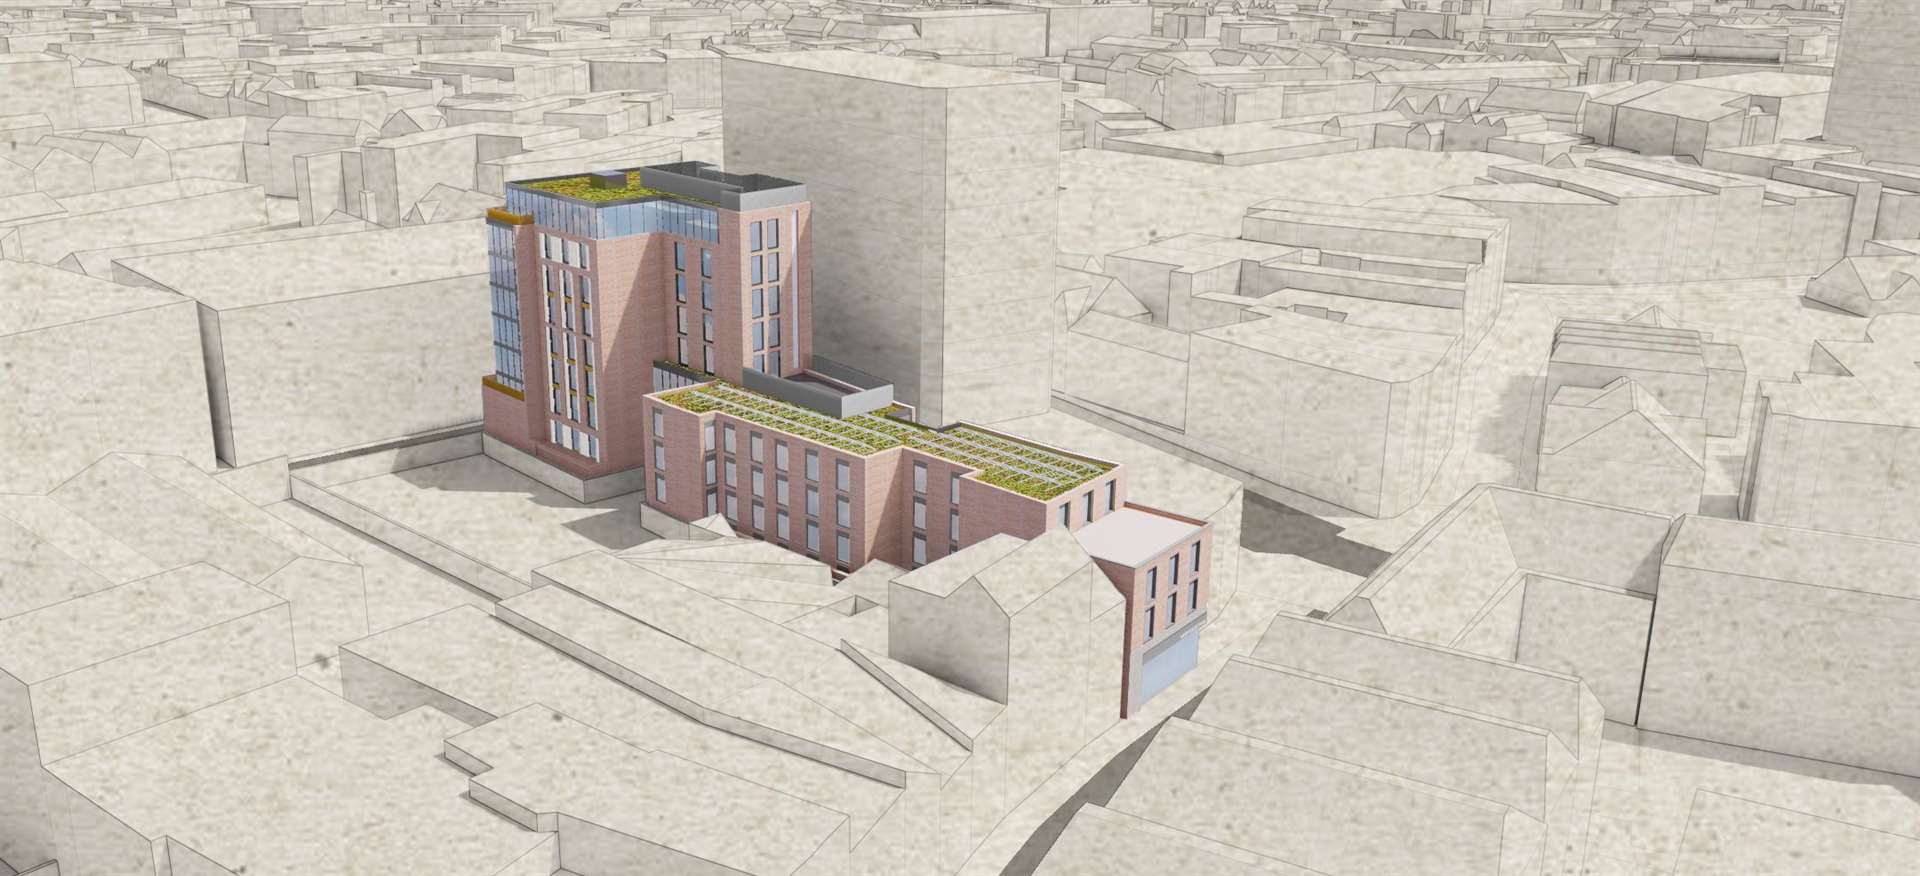 What the hotel could look like - the lower front part is on Week Street. Picture: Dexter Moren Associates